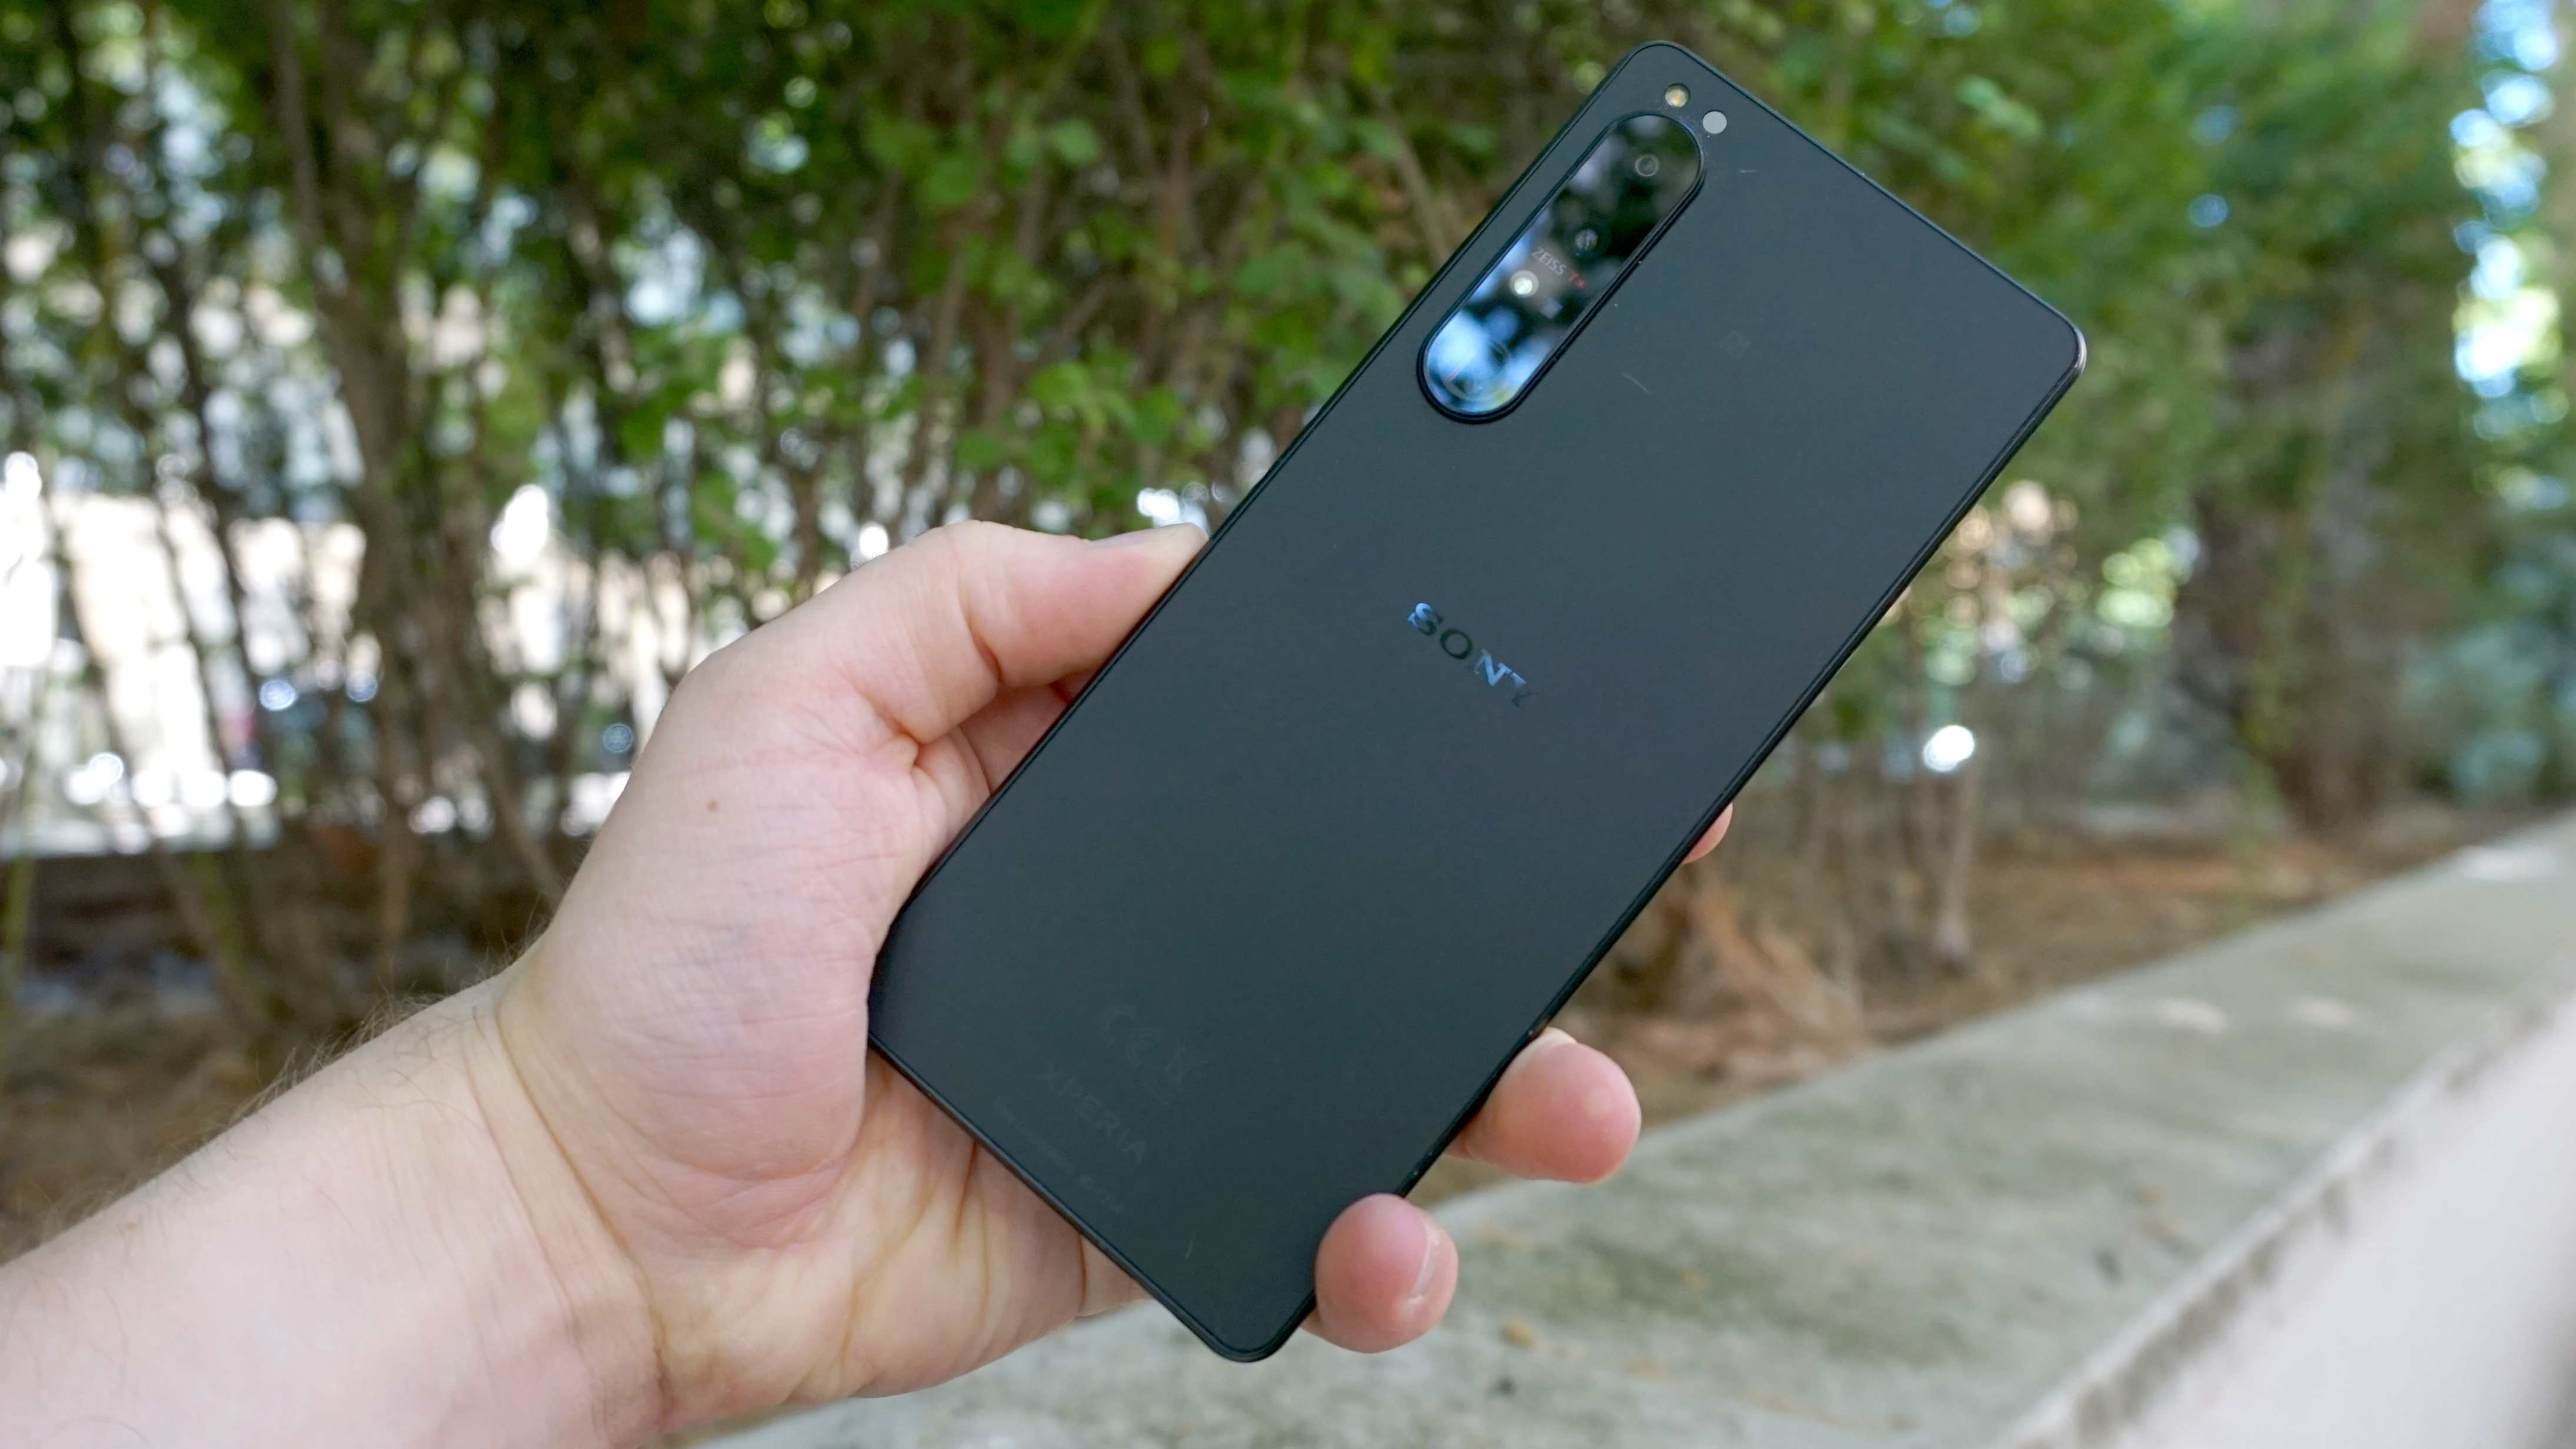 A Sony Xperia 1 IV from the back, in someone's hand